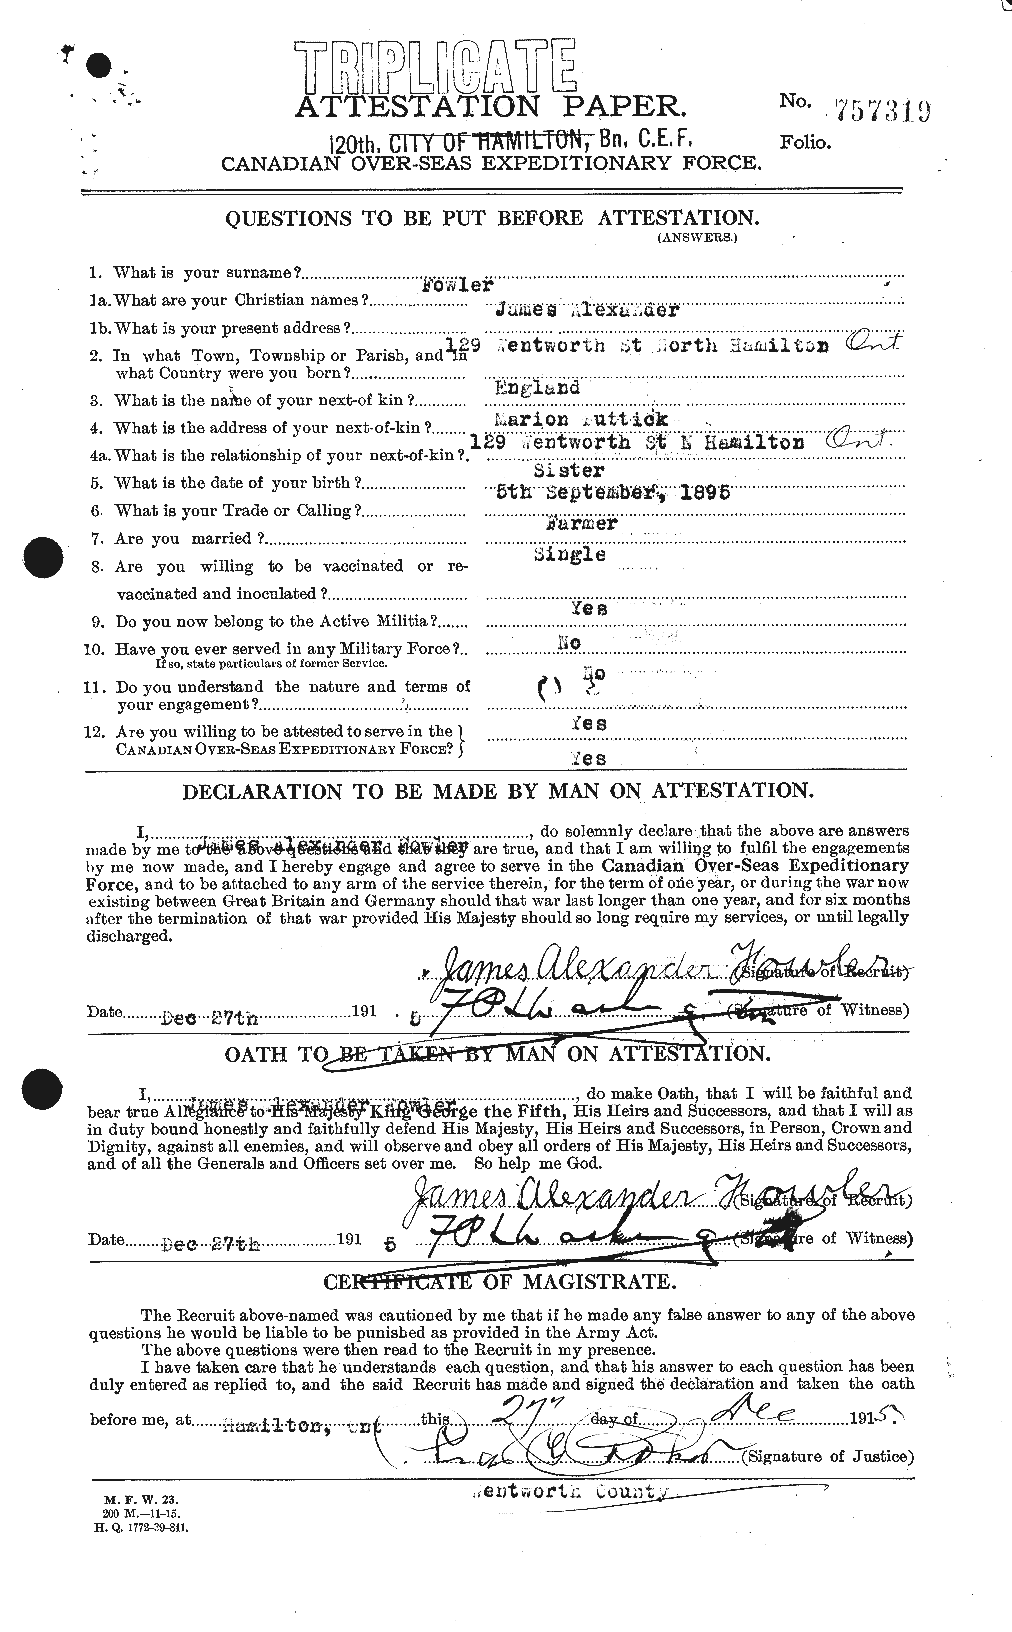 Personnel Records of the First World War - CEF 333098a